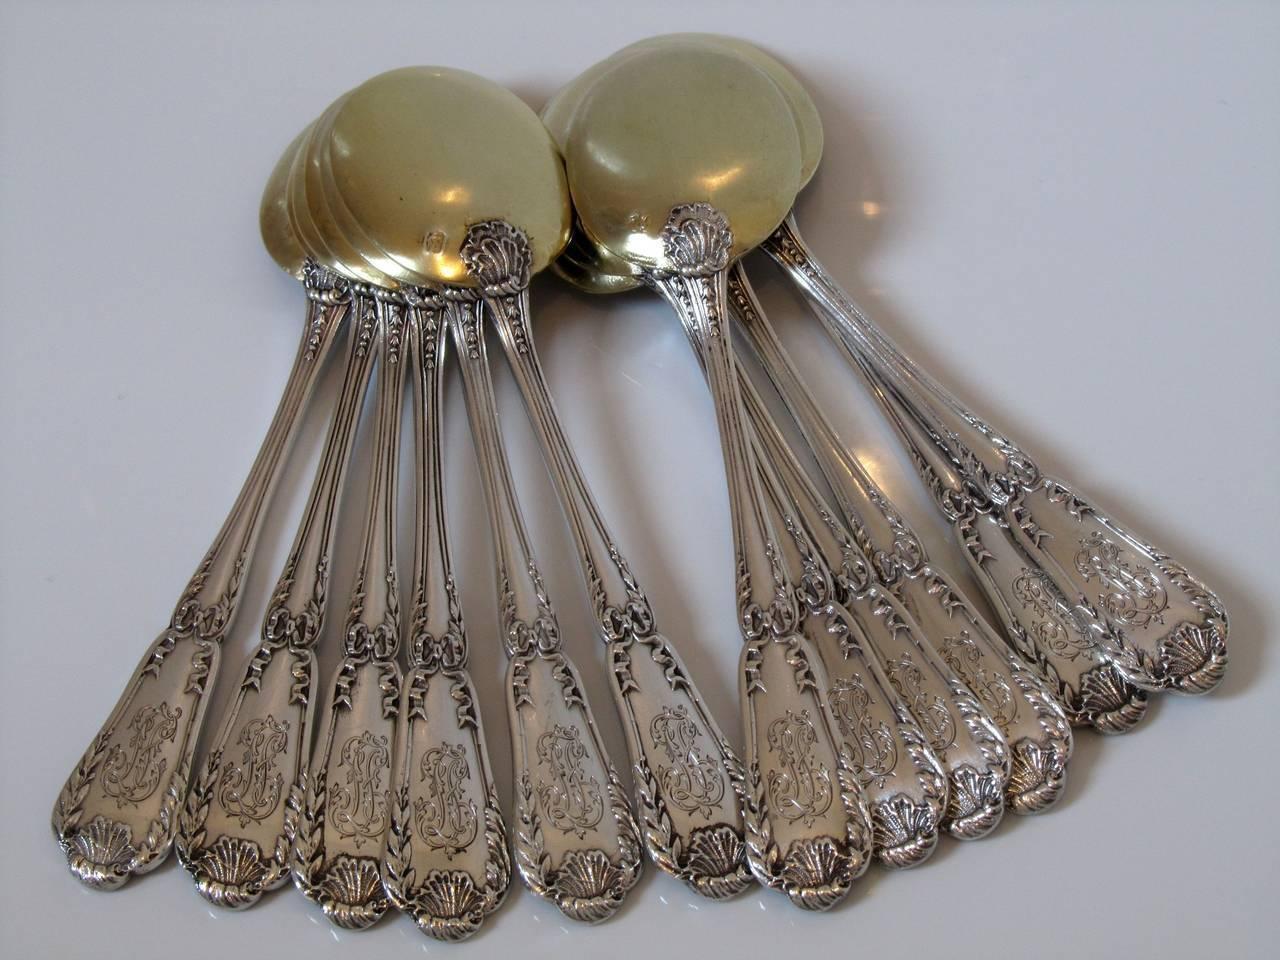 Late 19th Century French Sterling Silver 18K Gold Ice Cream Spoons 12-Pieces Set Puiforcat Model